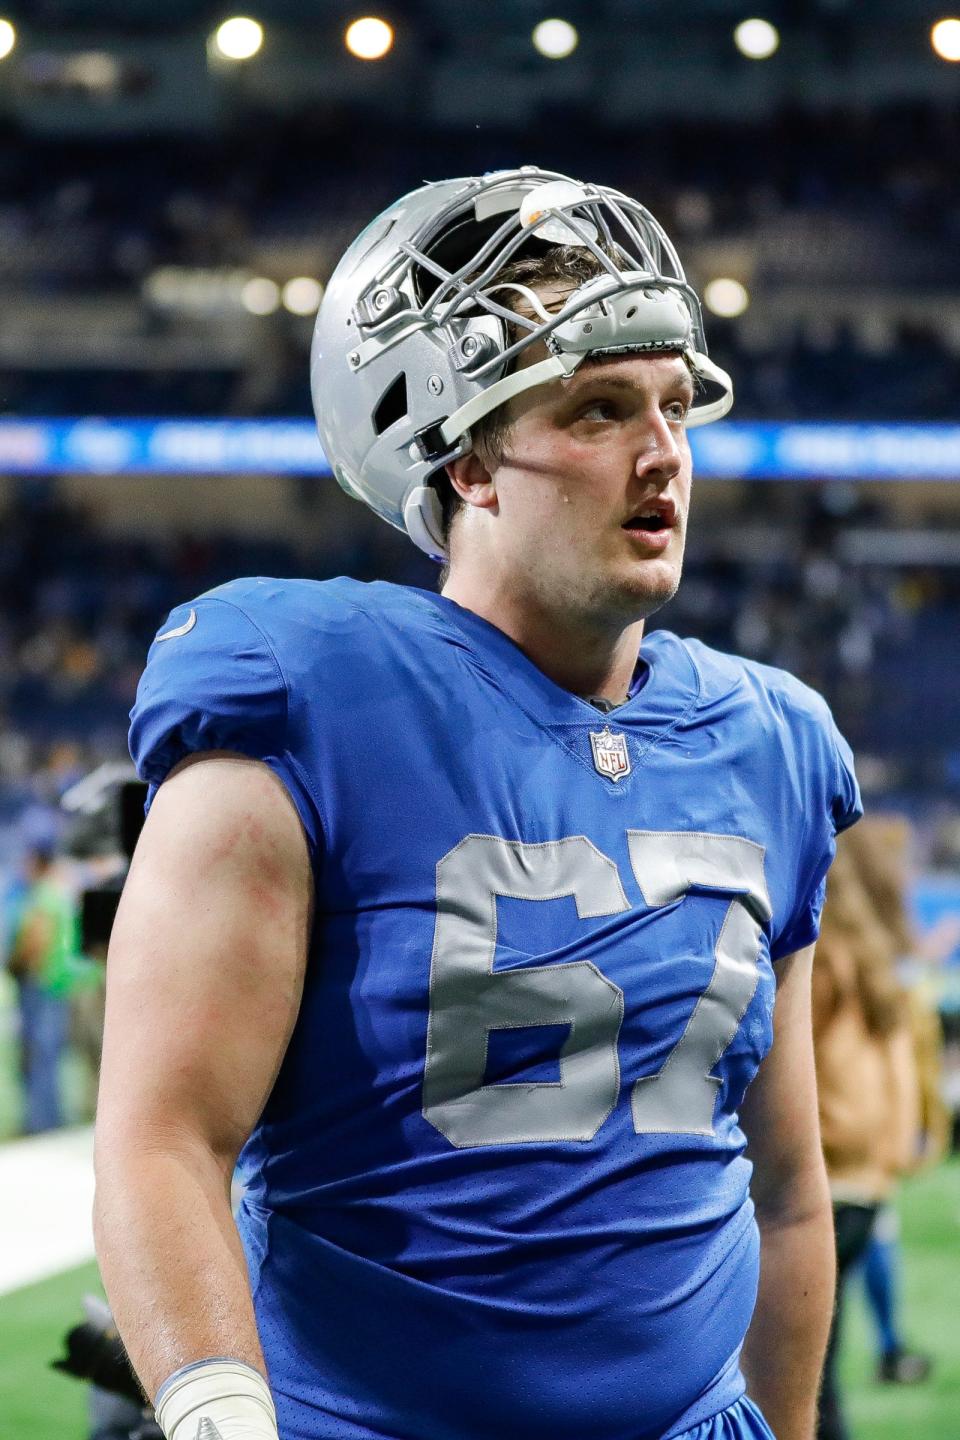 Matt Nelson spent the 2019 season on the Lions' practice squad, but is now projected to be a contributing offensive lineman in 2022.